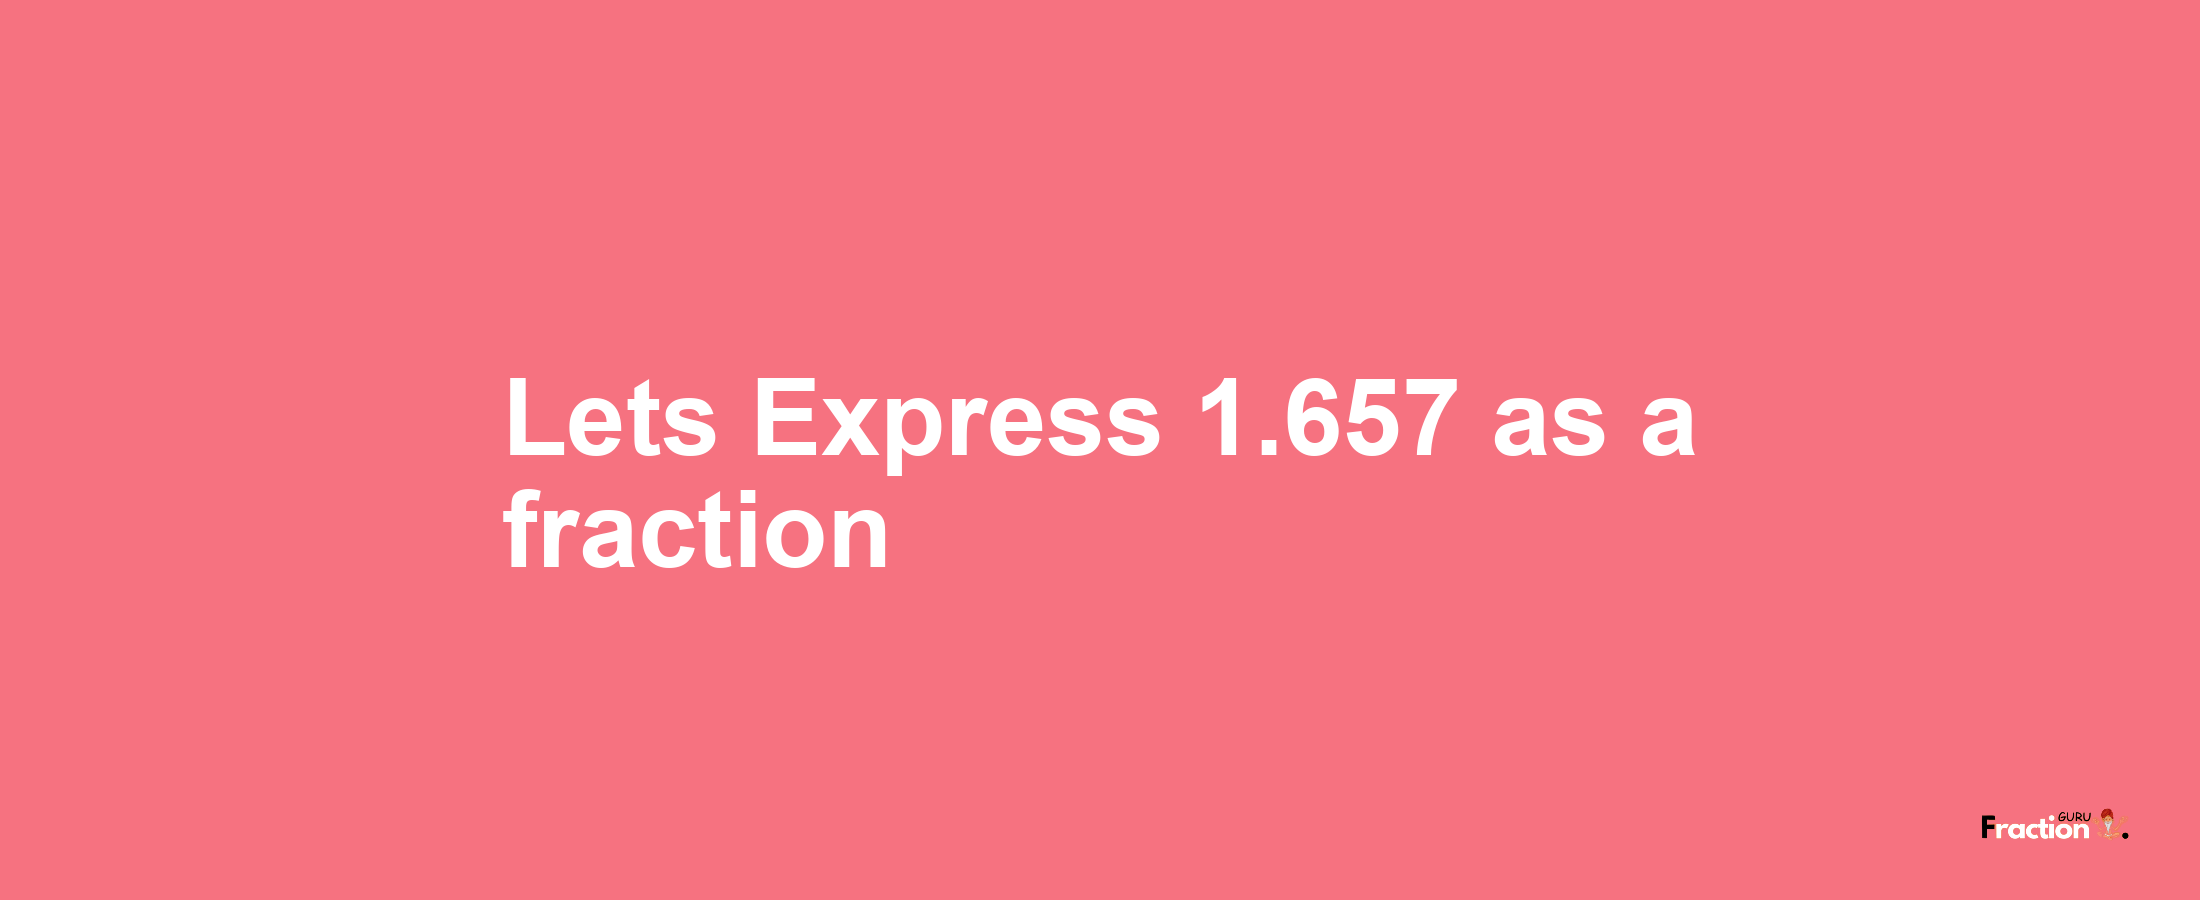 Lets Express 1.657 as afraction